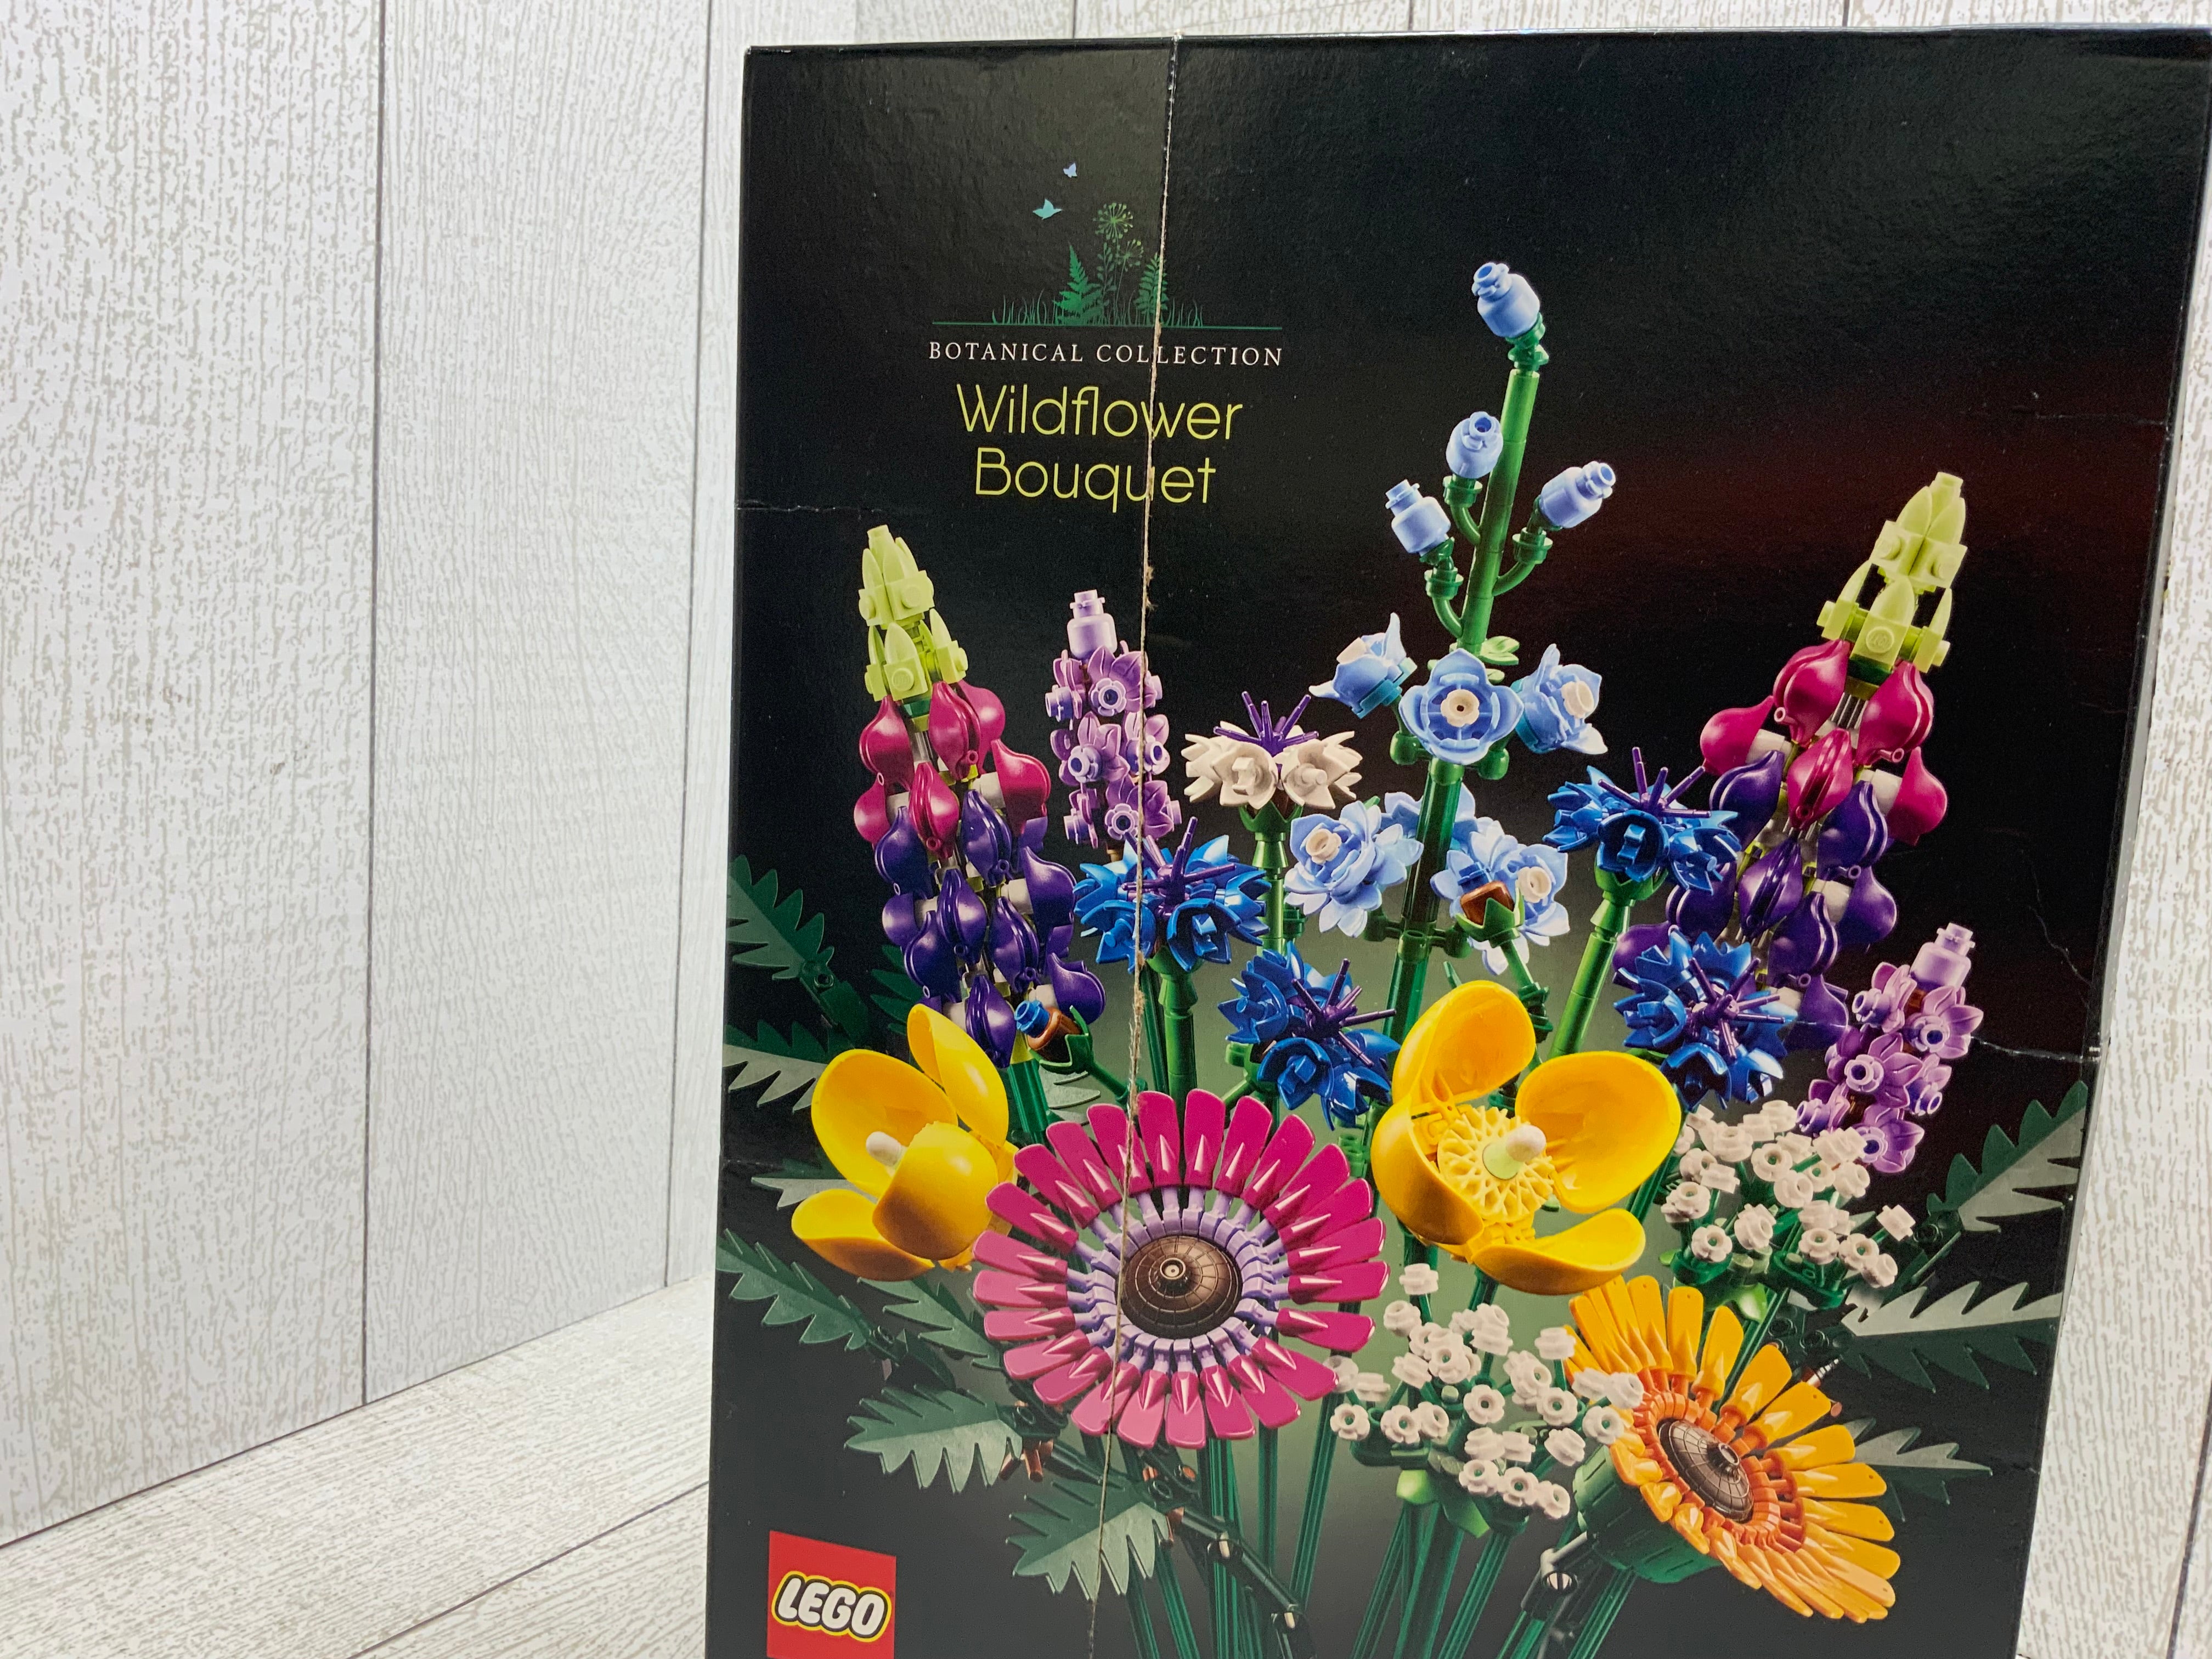 LEGO Icons Wildflower Bouquet 10313 Artificial Flowers with Poppies and Lavender (8048005775598)